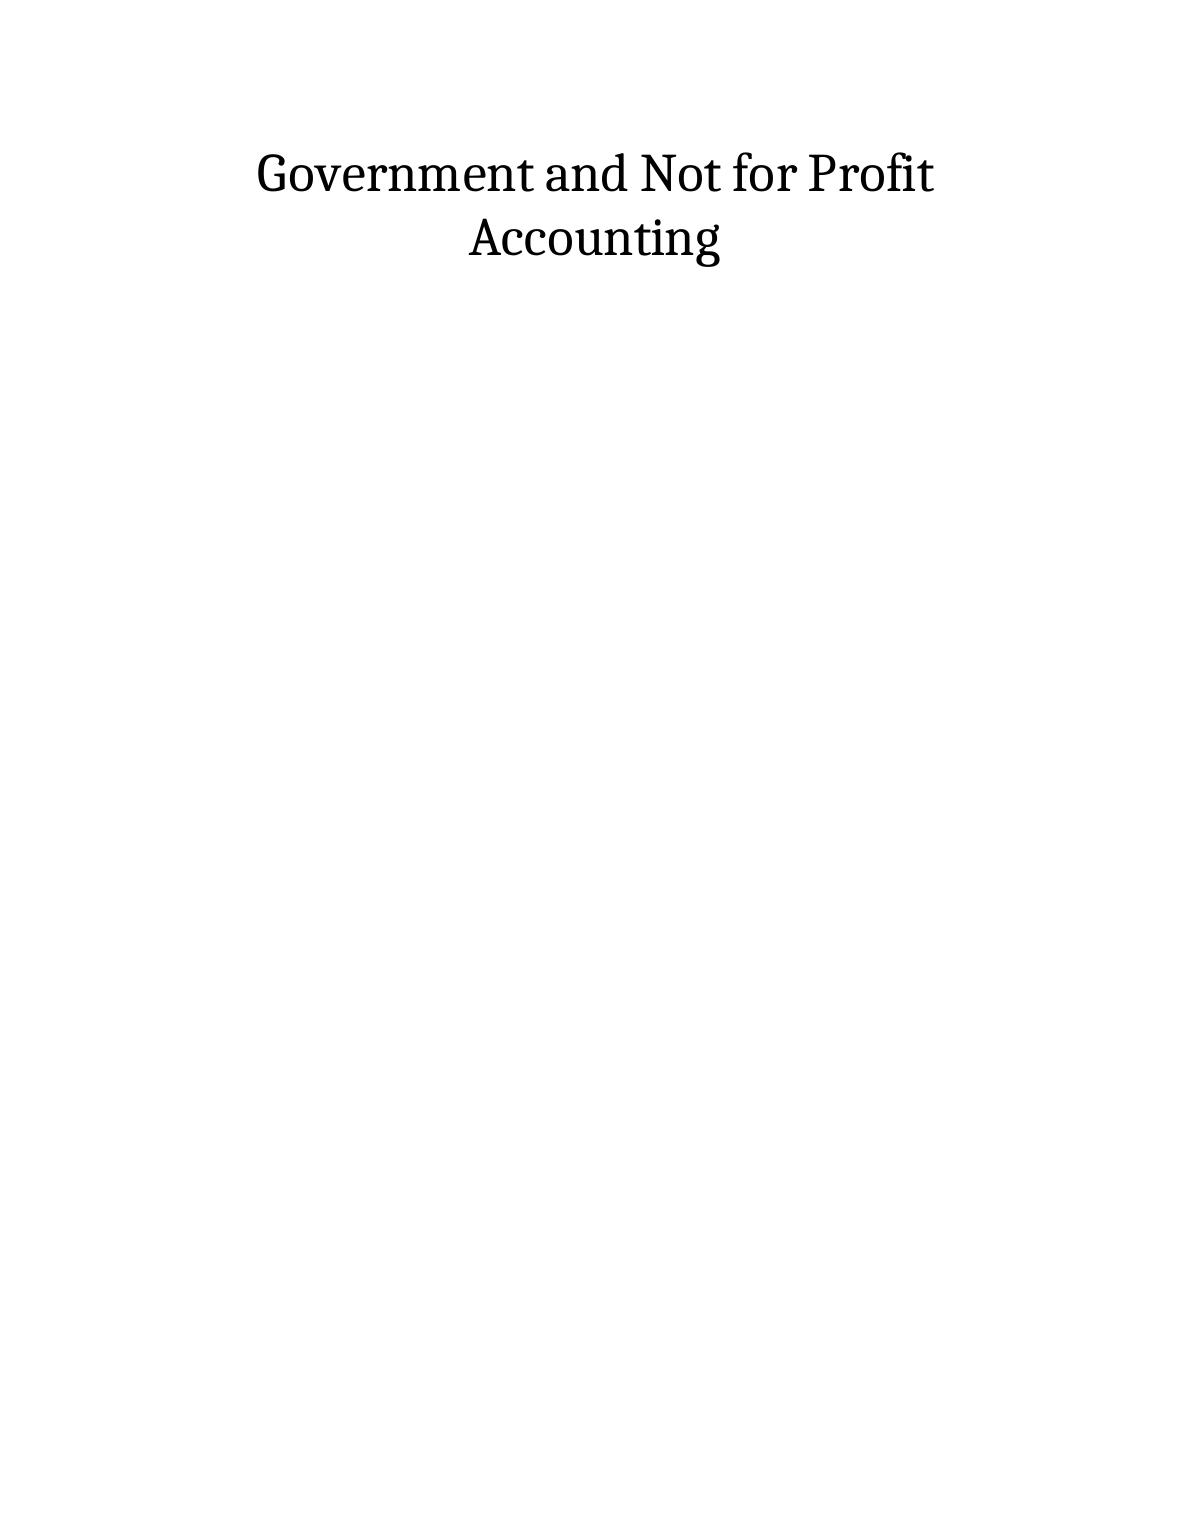 Government and Not for Profit Accounting PDF_1